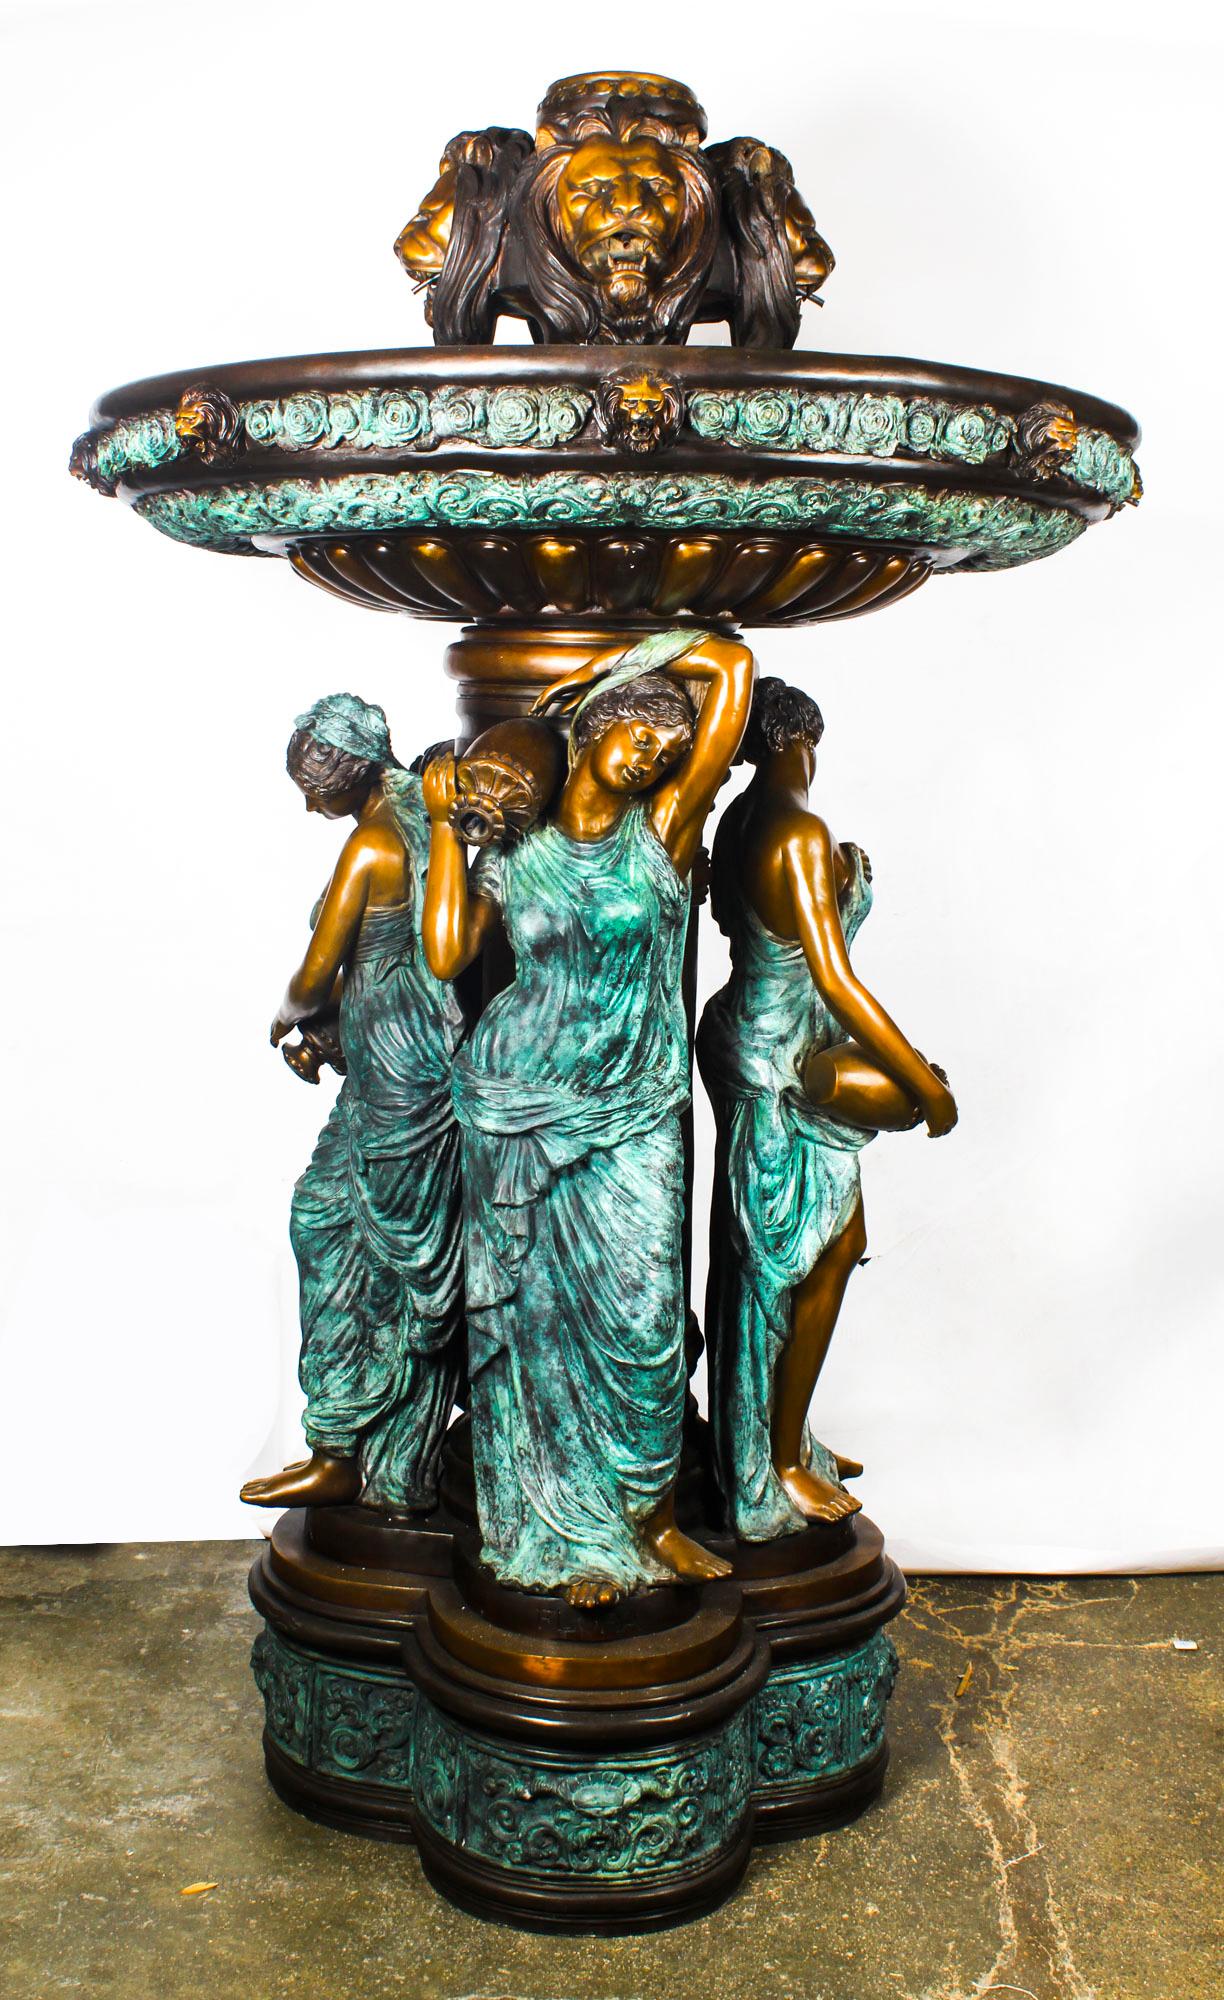 Vintage Monumental Neo-Classical Revival Bronze Sculptural Pond Fountain 20th C For Sale 7